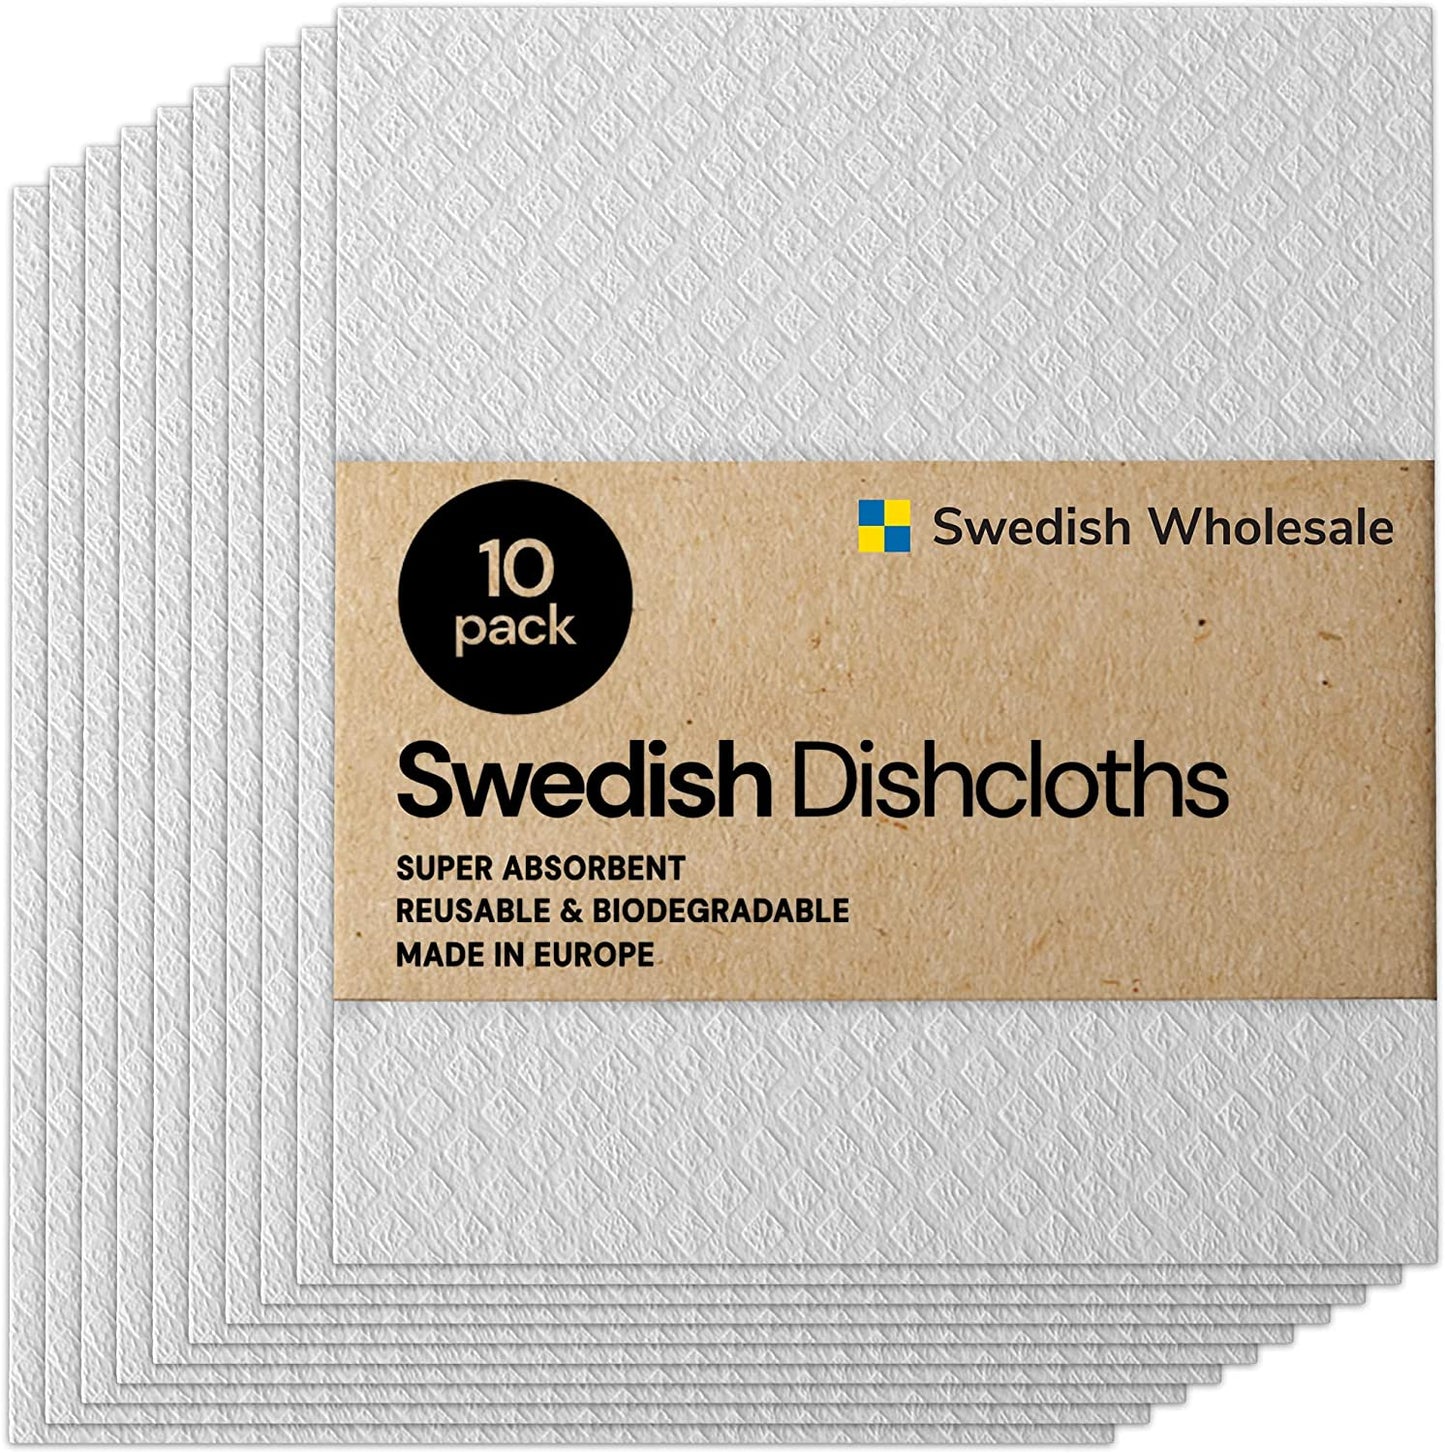 Swedish Wholesale Swedish Dish Cloths - 10 Pack Reusable, Absorbent Hand Towels for Kitchen, Counters & Washing Dishes - Cellulose Sponge Cloth - Eco Friendly Gifts - Assorted